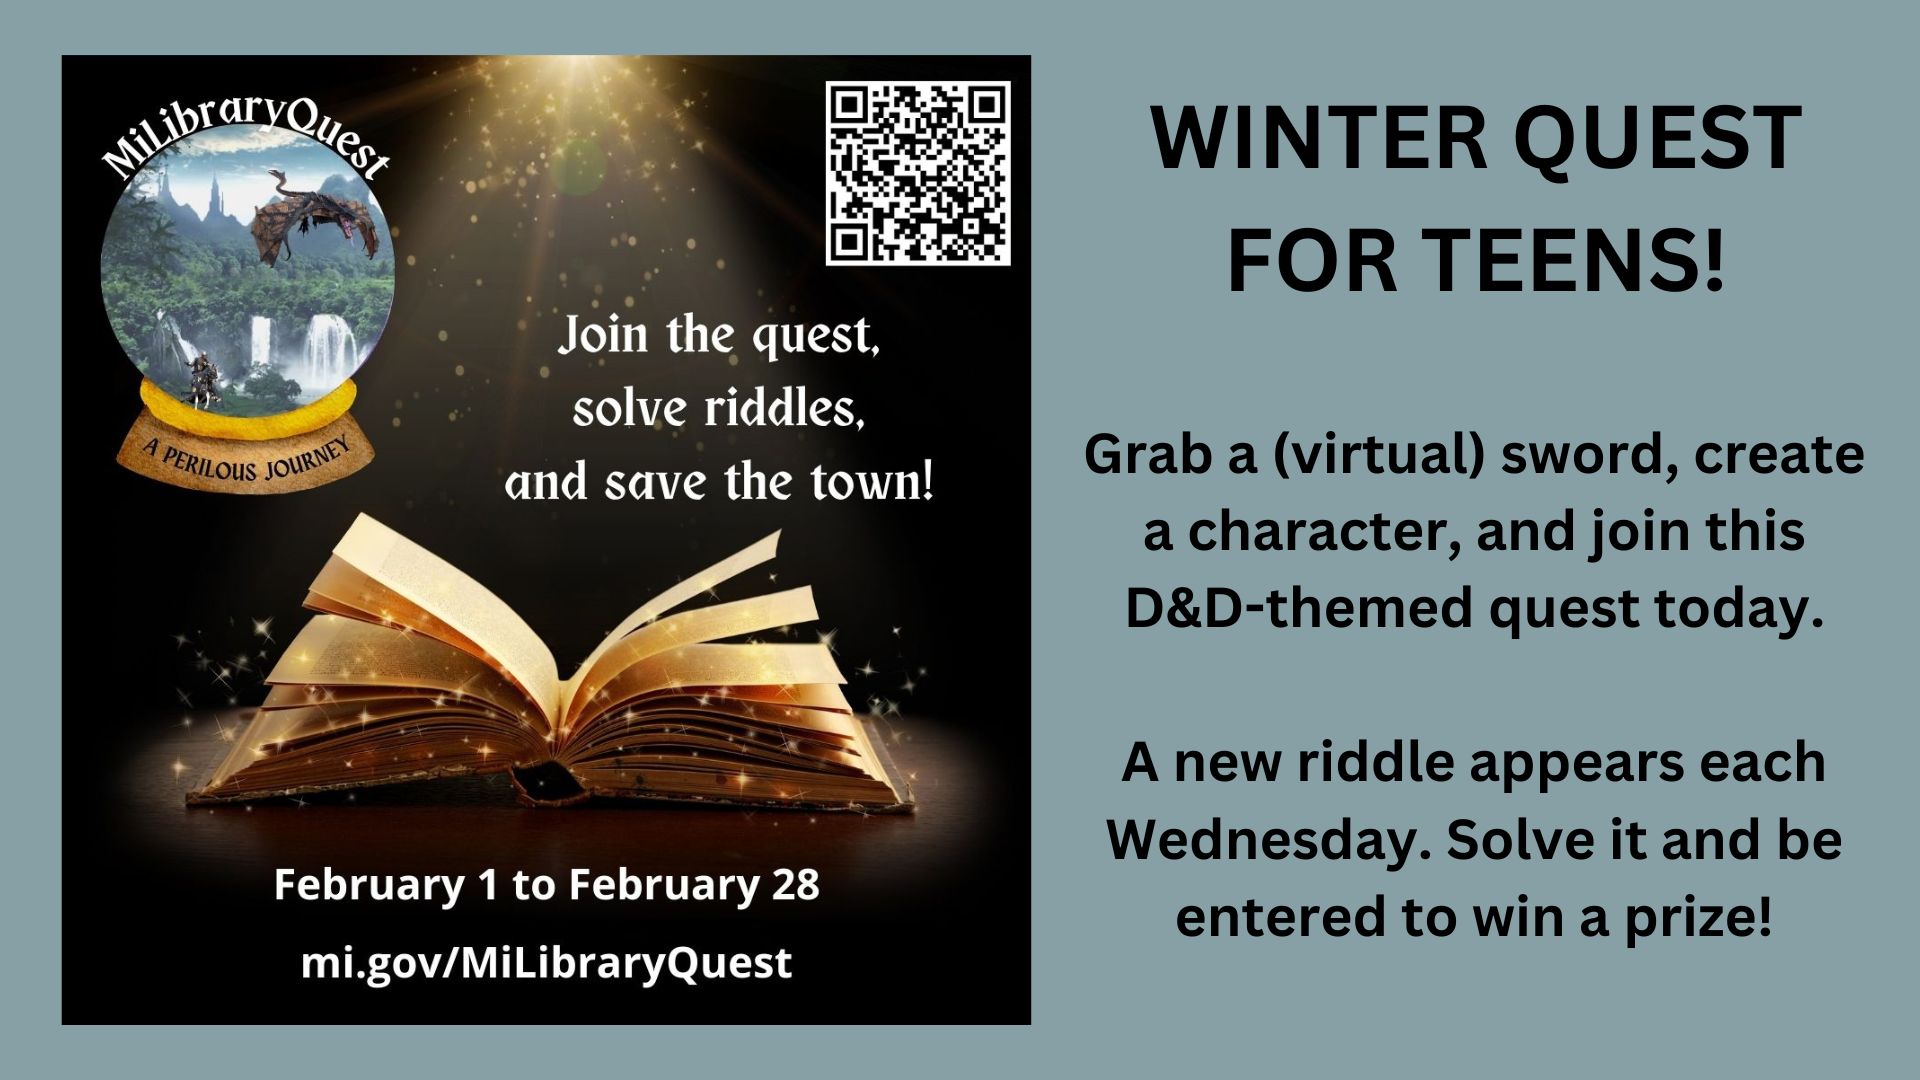 WINTER QUEST FOR TEENS